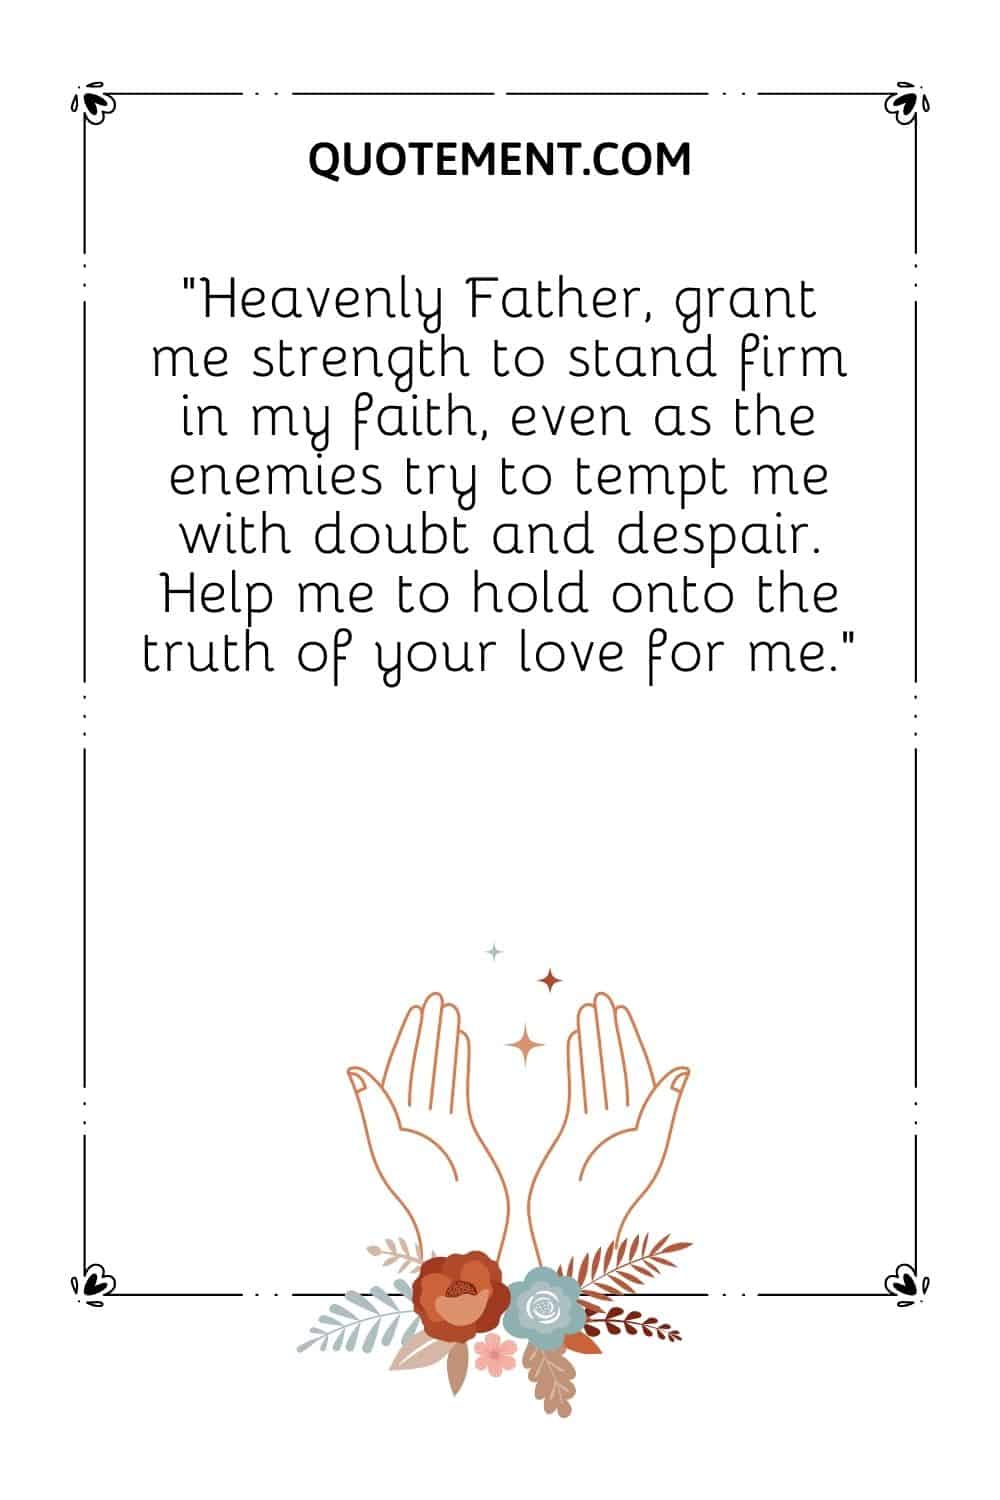 Heavenly Father, grant me strength to stand firm in my faith, even as the enemies try to tempt me with doubt and despair